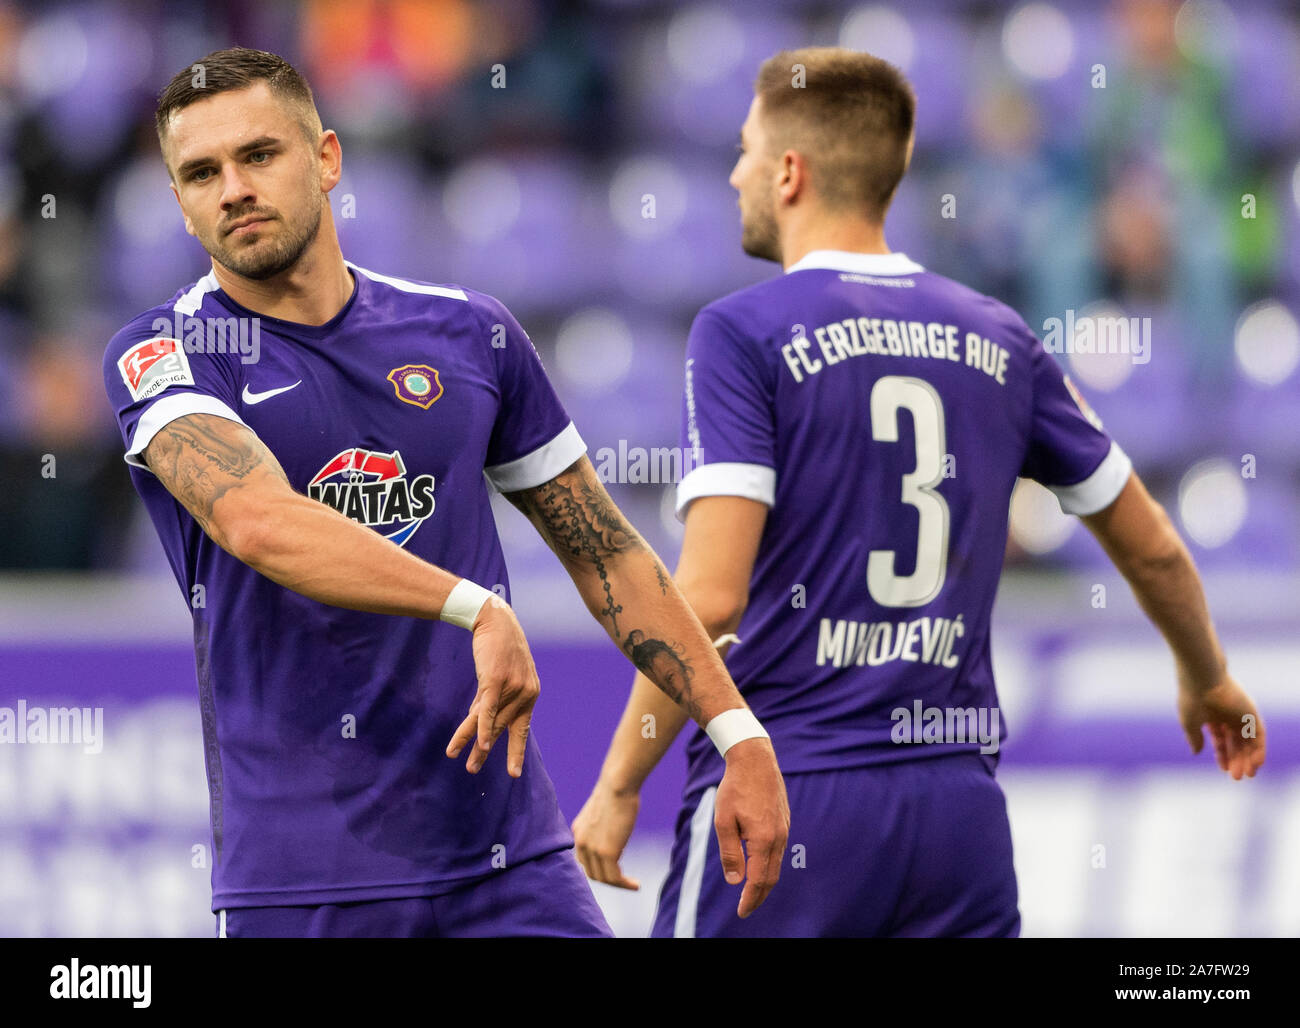 02 November 2019, Saxony, Aue: Soccer: 2nd Bundesliga, FC Erzgebirge Aue - 1st FC Heidenheim, 12th matchday, in the Sparkassen-Erzgebirgsstadion. Aues Pascal Testroet (r) and Marko Mihojevic are disappointed after the 1:1. Photo: Robert Michael/dpa-Zentralbild/dpa - IMPORTANT NOTE: In accordance with the requirements of the DFL Deutsche Fußball Liga or the DFB Deutscher Fußball-Bund, it is prohibited to use or have used photographs taken in the stadium and/or the match in the form of sequence images and/or video-like photo sequences. Stock Photo